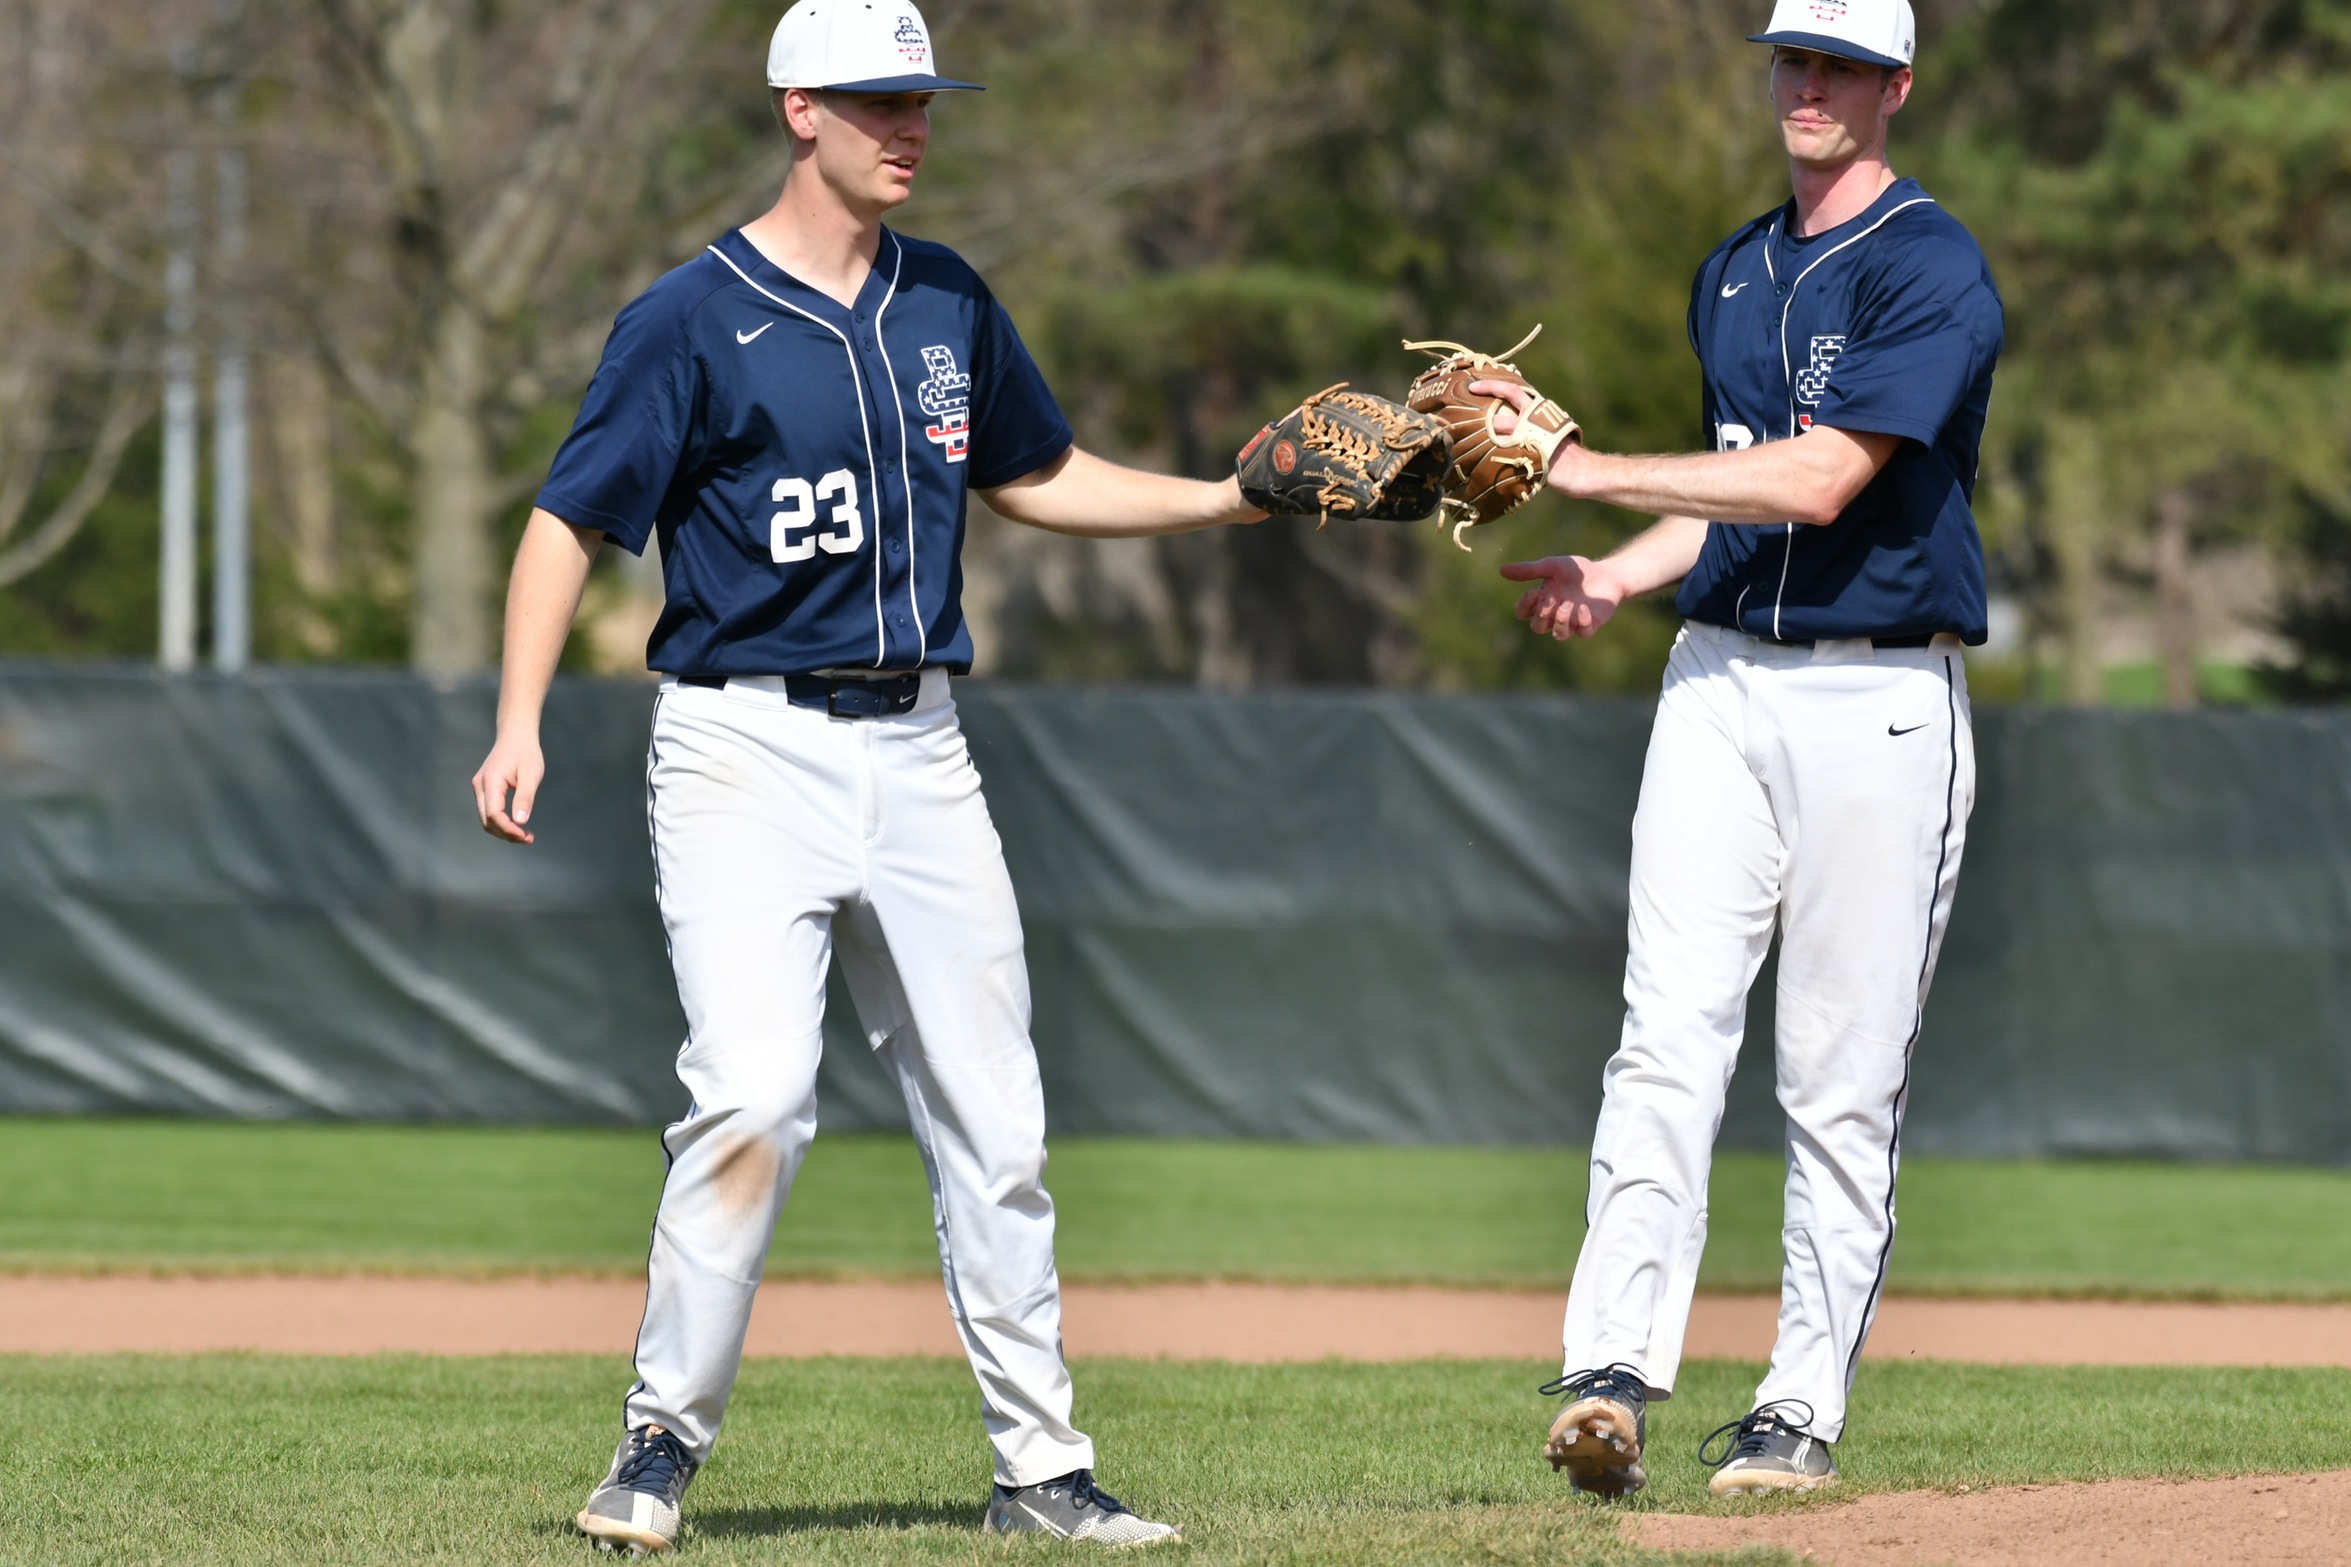 Behrend Offense Erupts for 21 Hits in Non-Conference Win